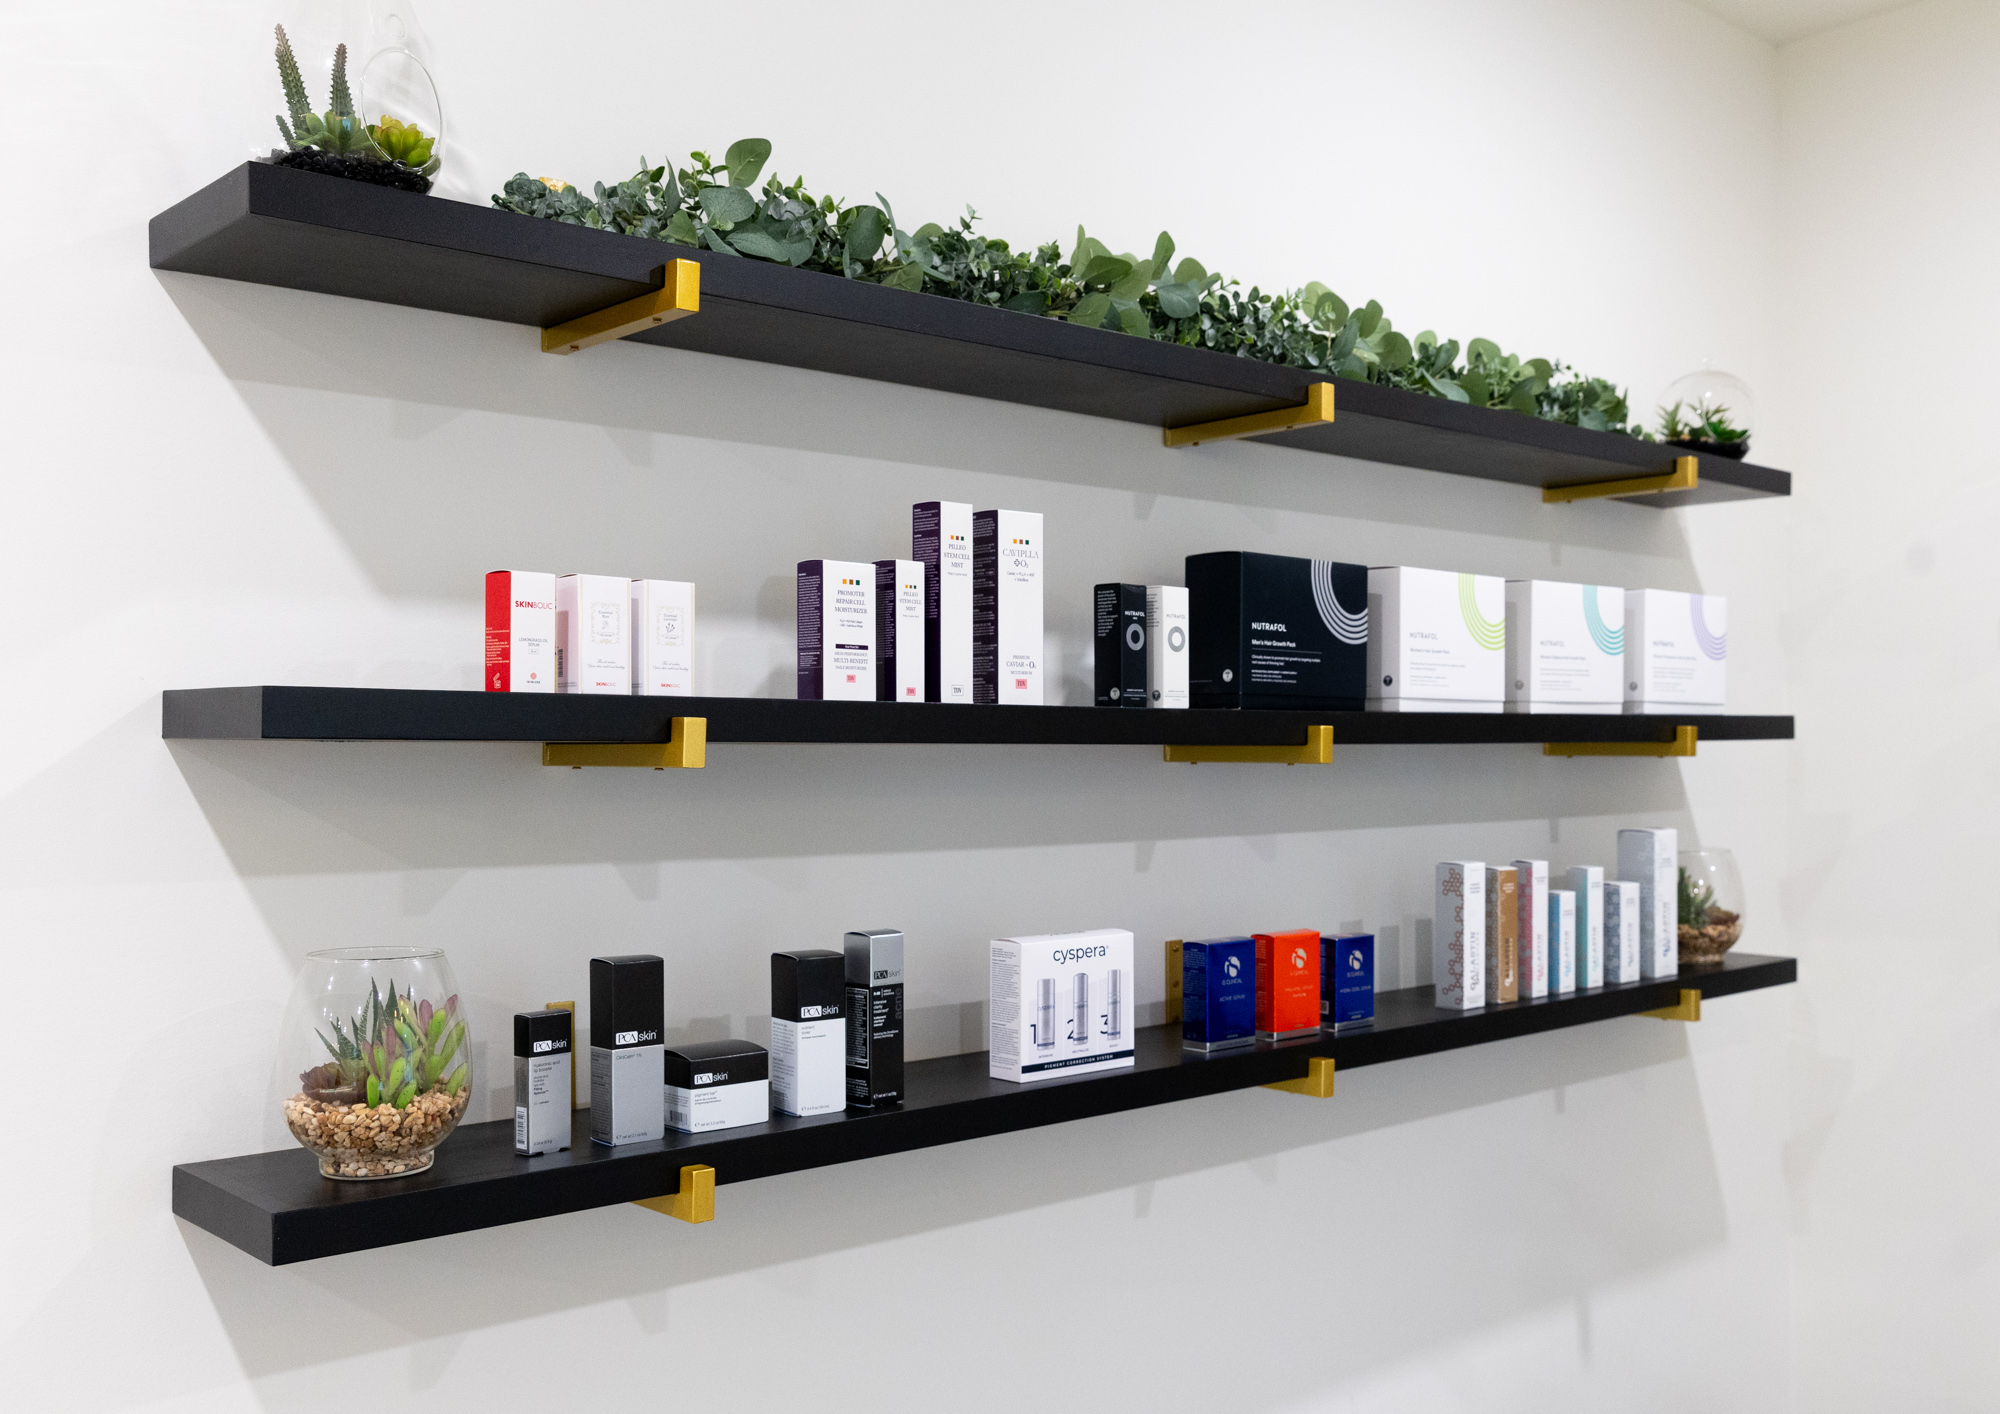 Your Skin Prescription's selection of medical-grade skin care products